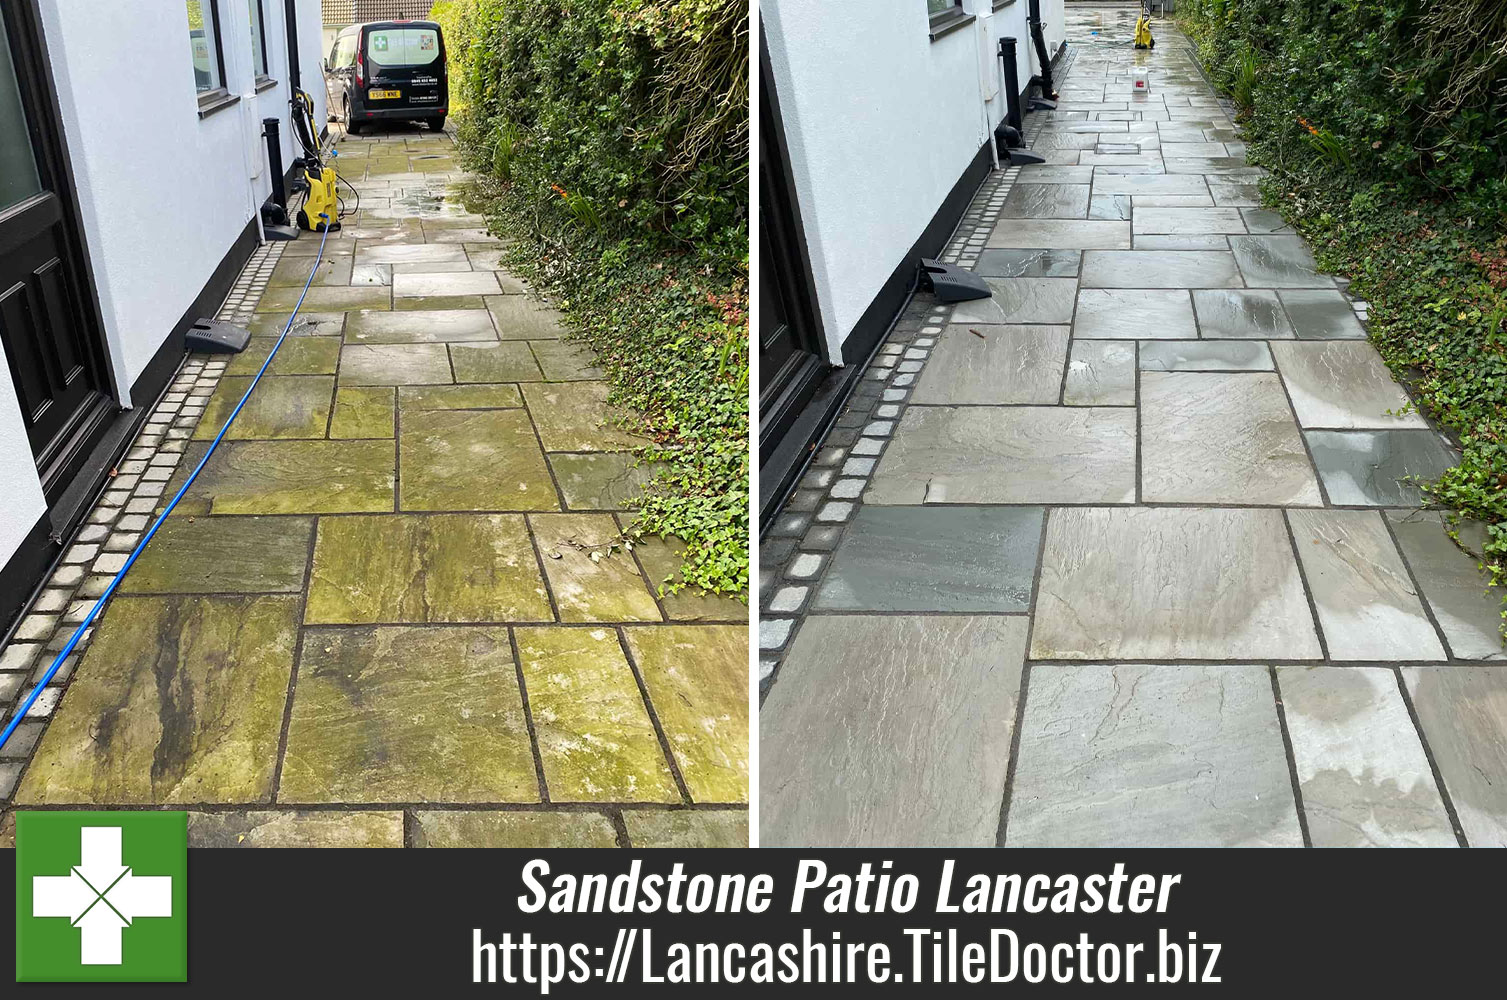 Removing Black Spot from an Indian Sandstone Patio in Lancaster with Patio and Brick Driveway Cleaner